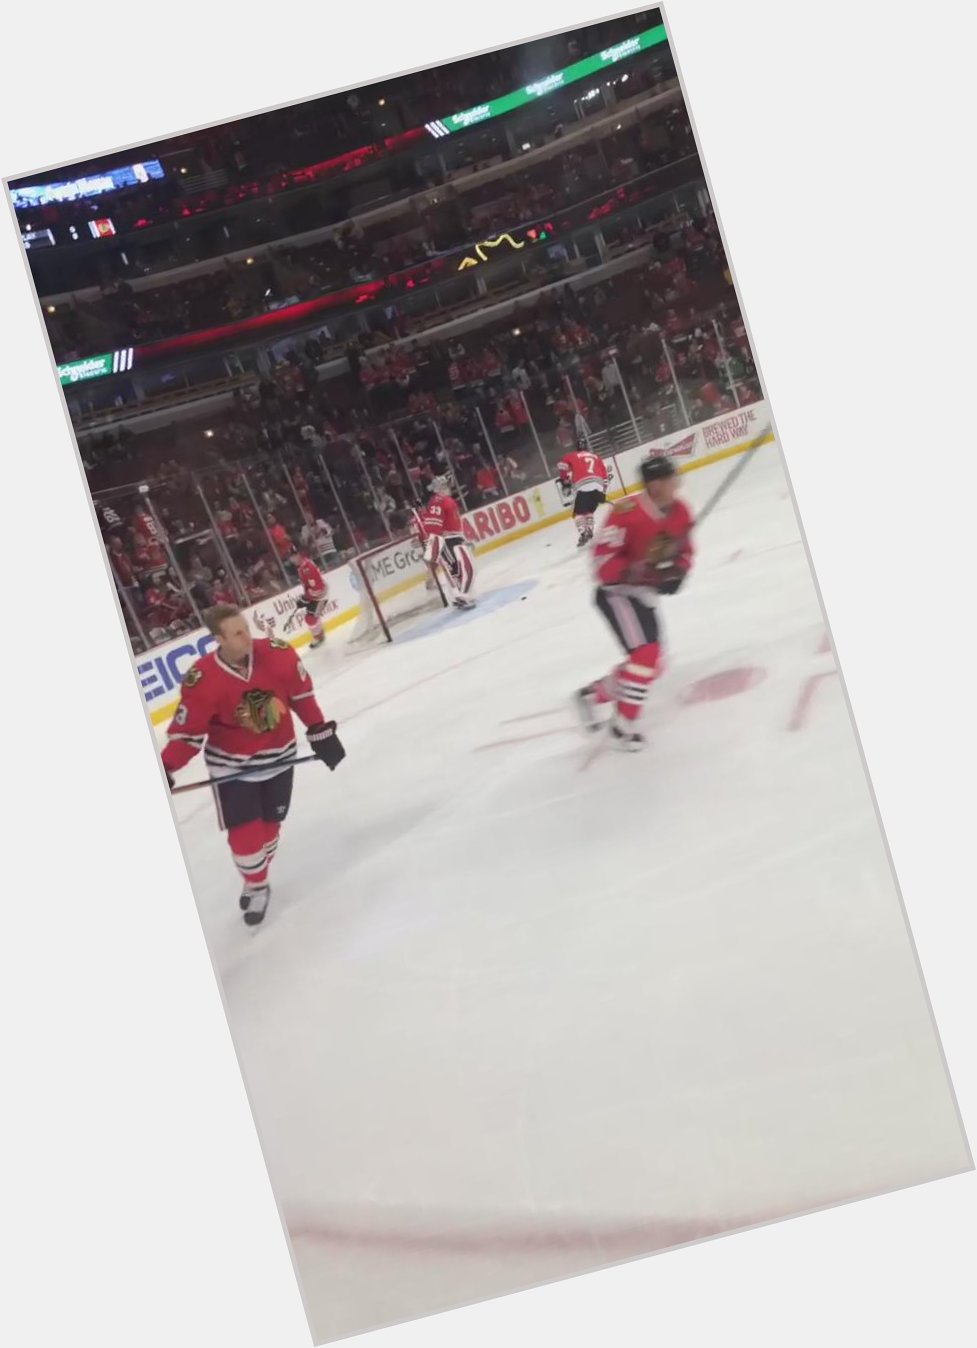 Happy bday to my fav hawks player Jonathan Toews    (ft. in the background) 